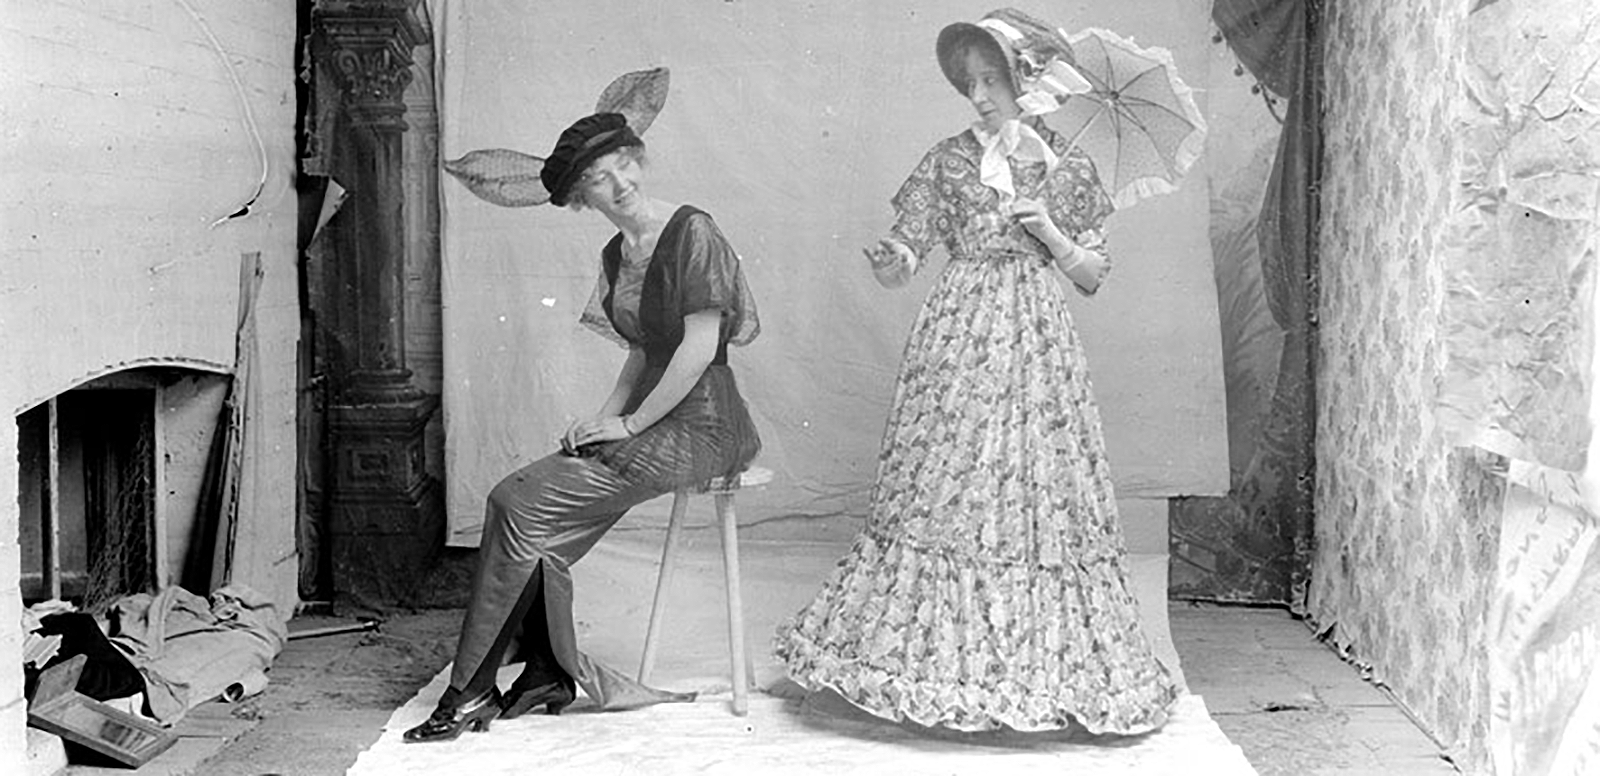 Two women dressed up for a photo shoot, c1910.